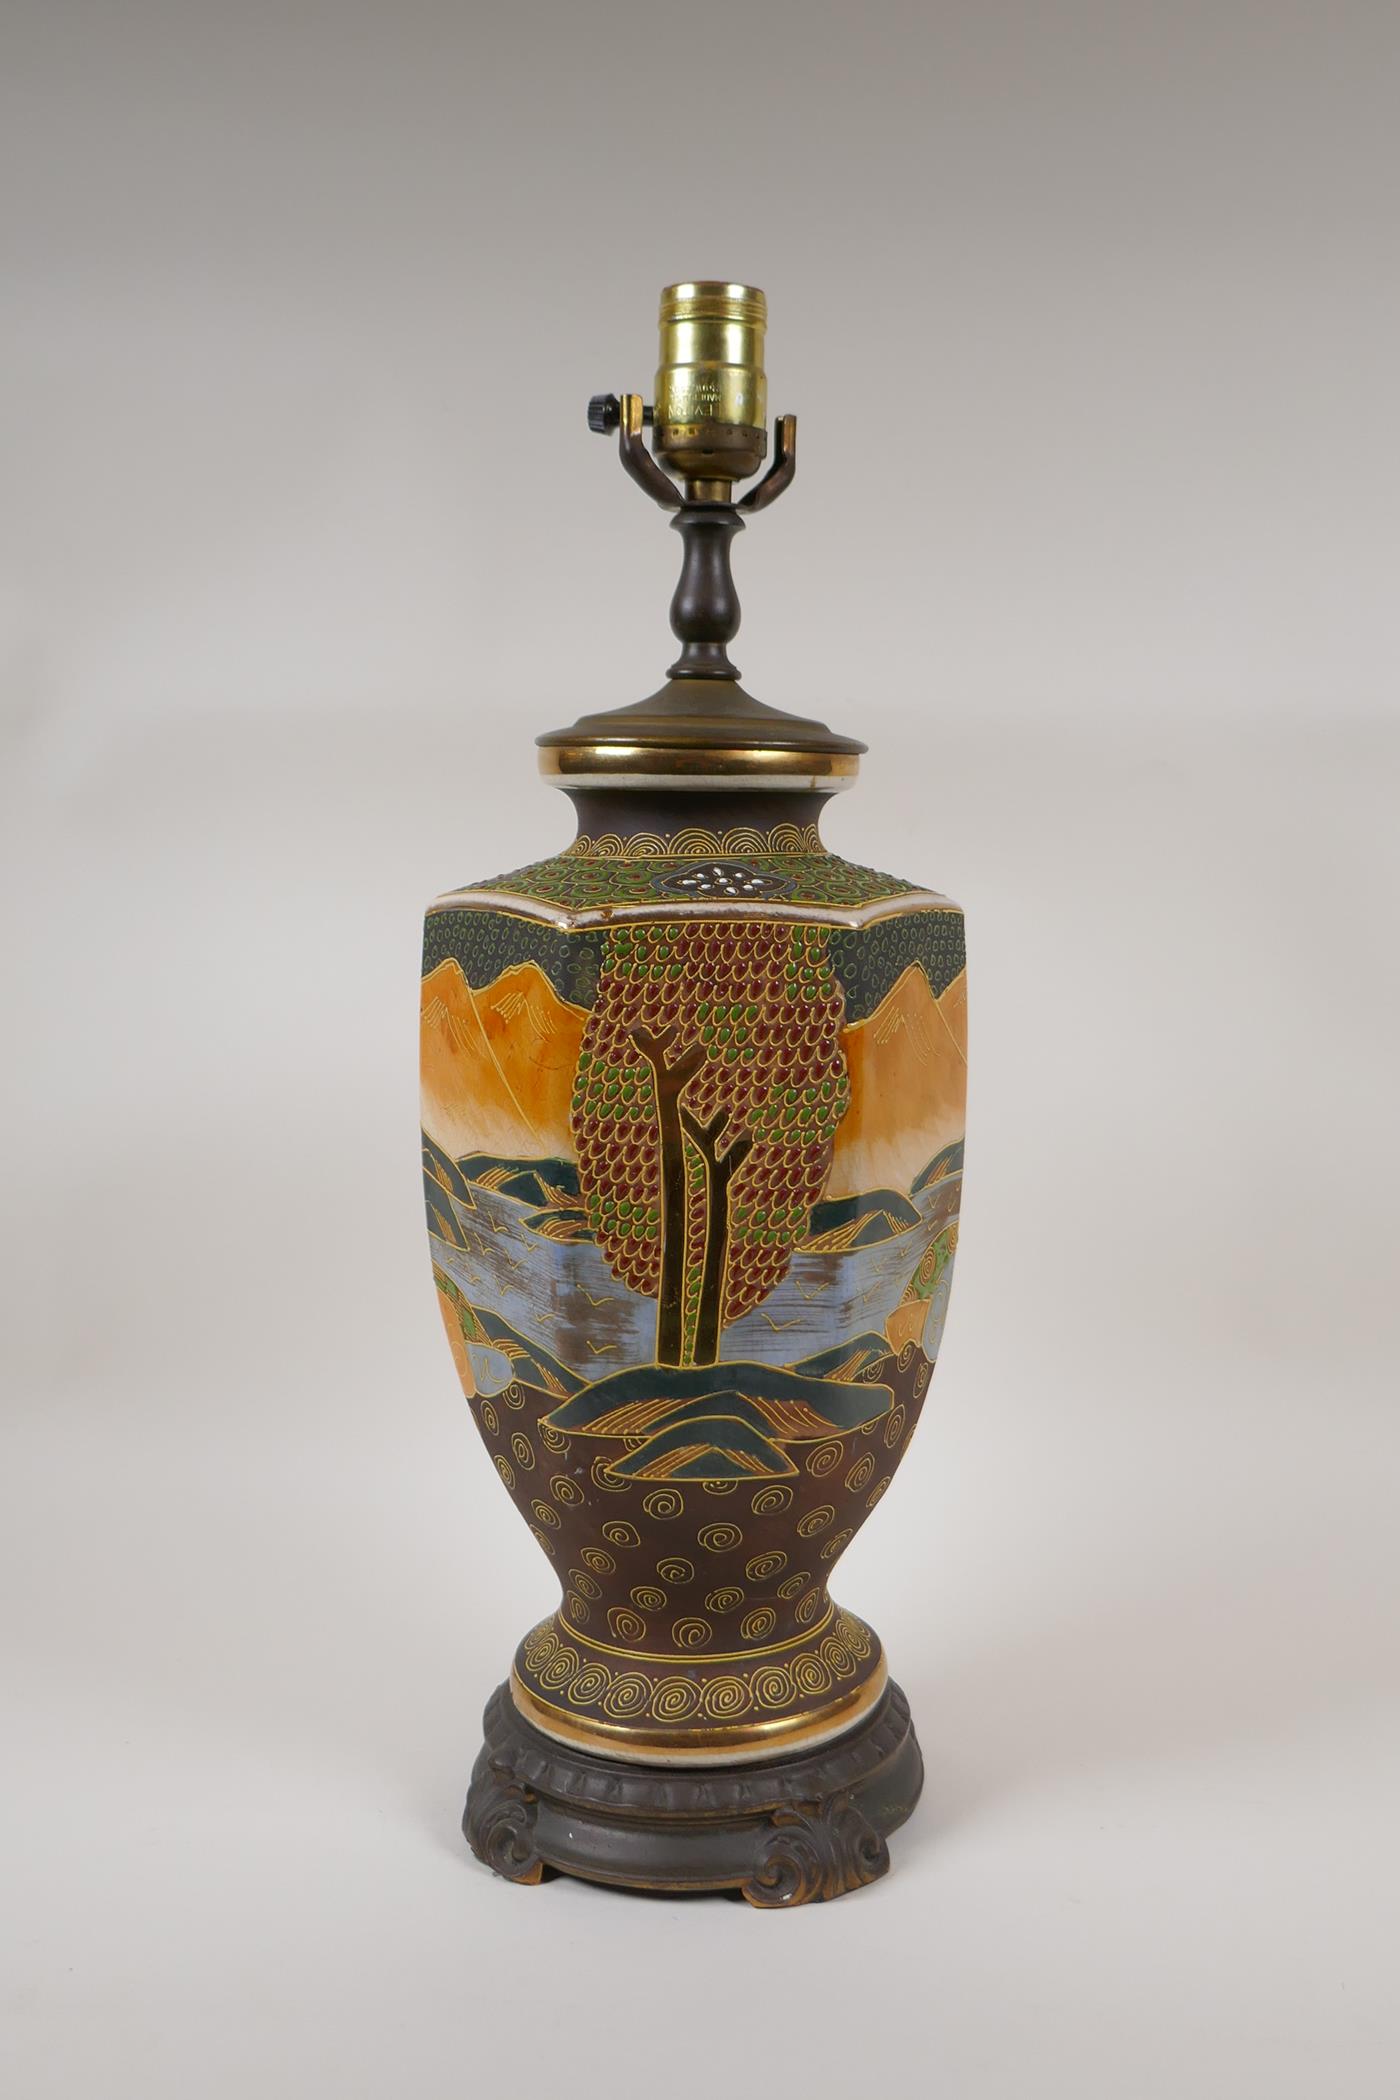 A Japanese Satsuma pottery lamp with figural decoration and bronzed metal mounts, 18½" high - Image 8 of 8